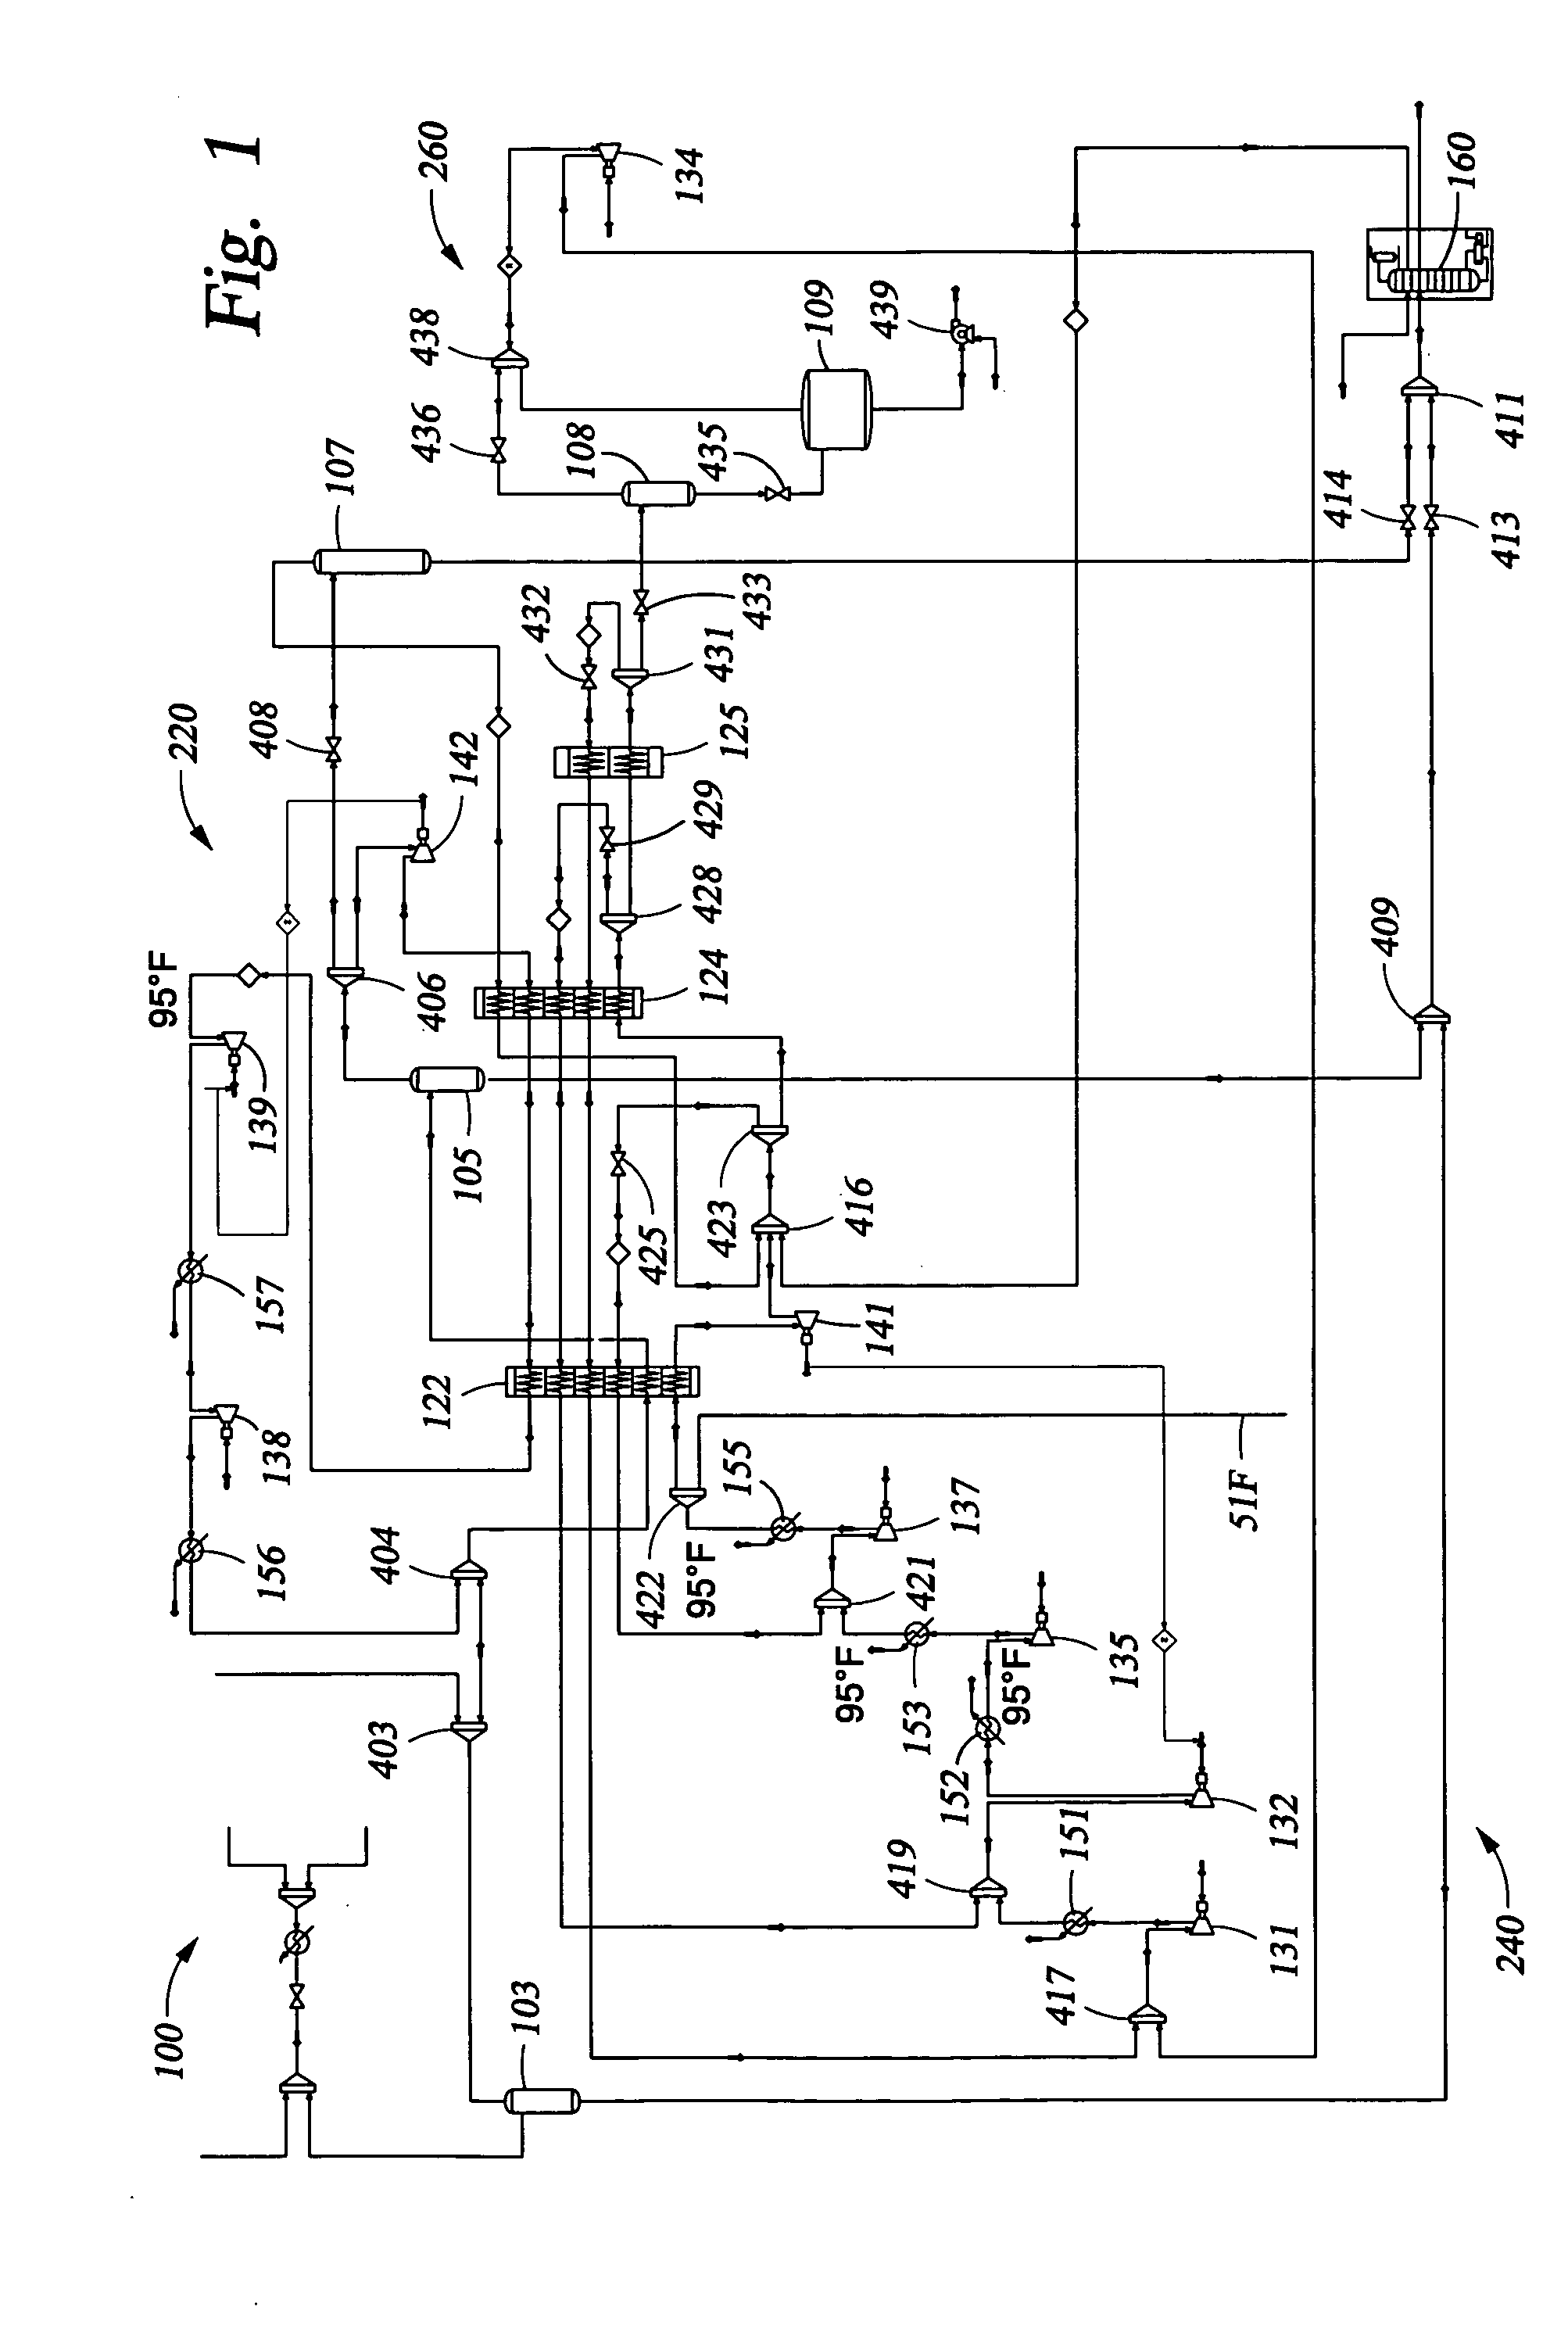 Apparatus and methods for processing hydrocarbons to produce liquified natural gas